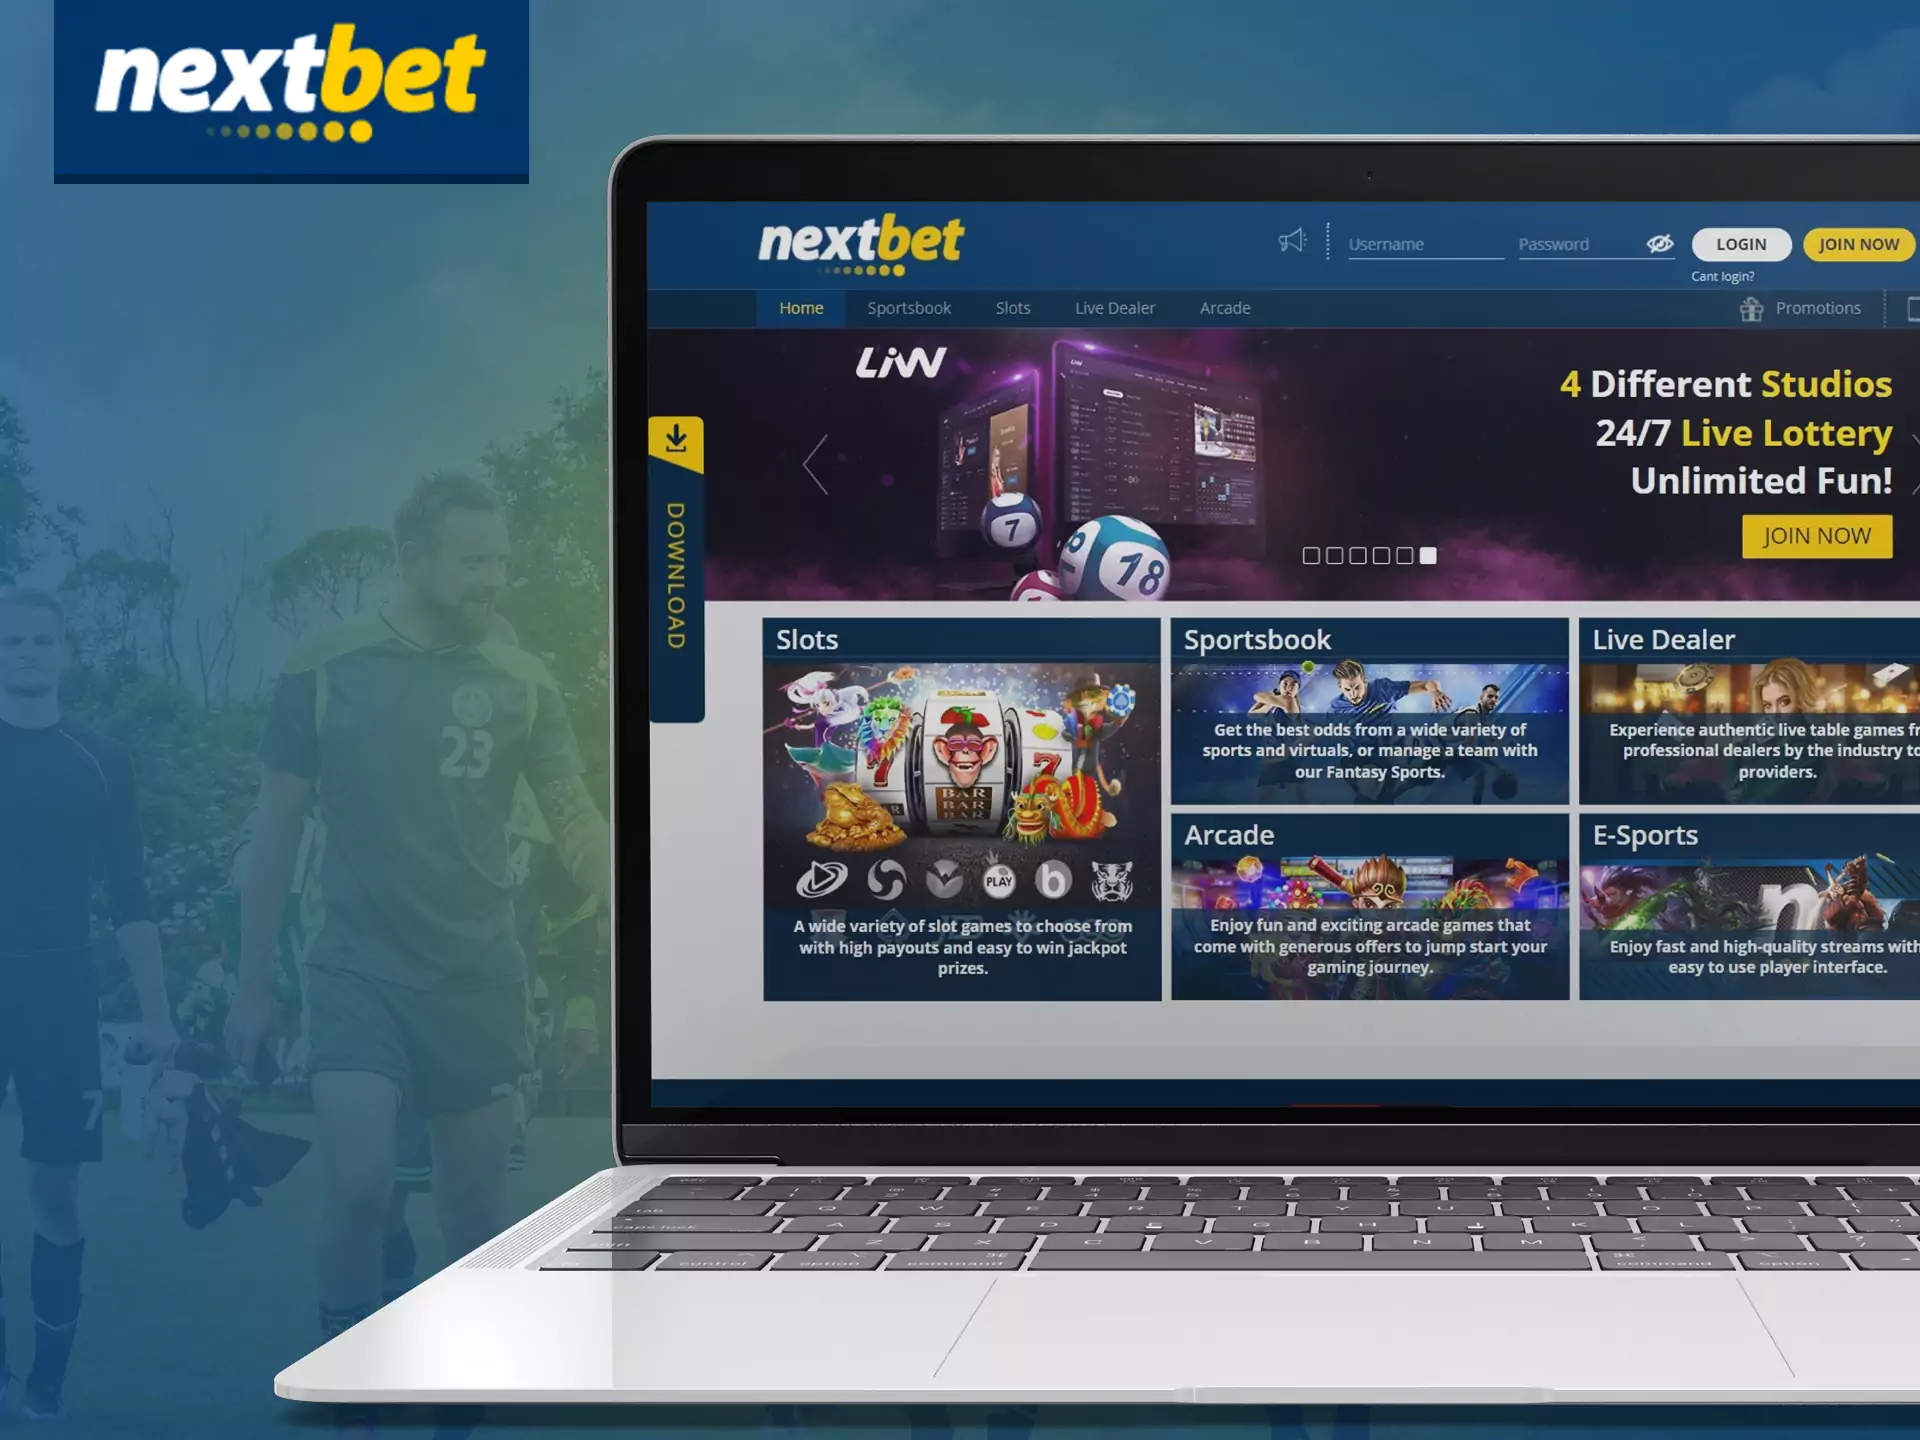 You can place bets and play at the casino on the official Nextbet website.